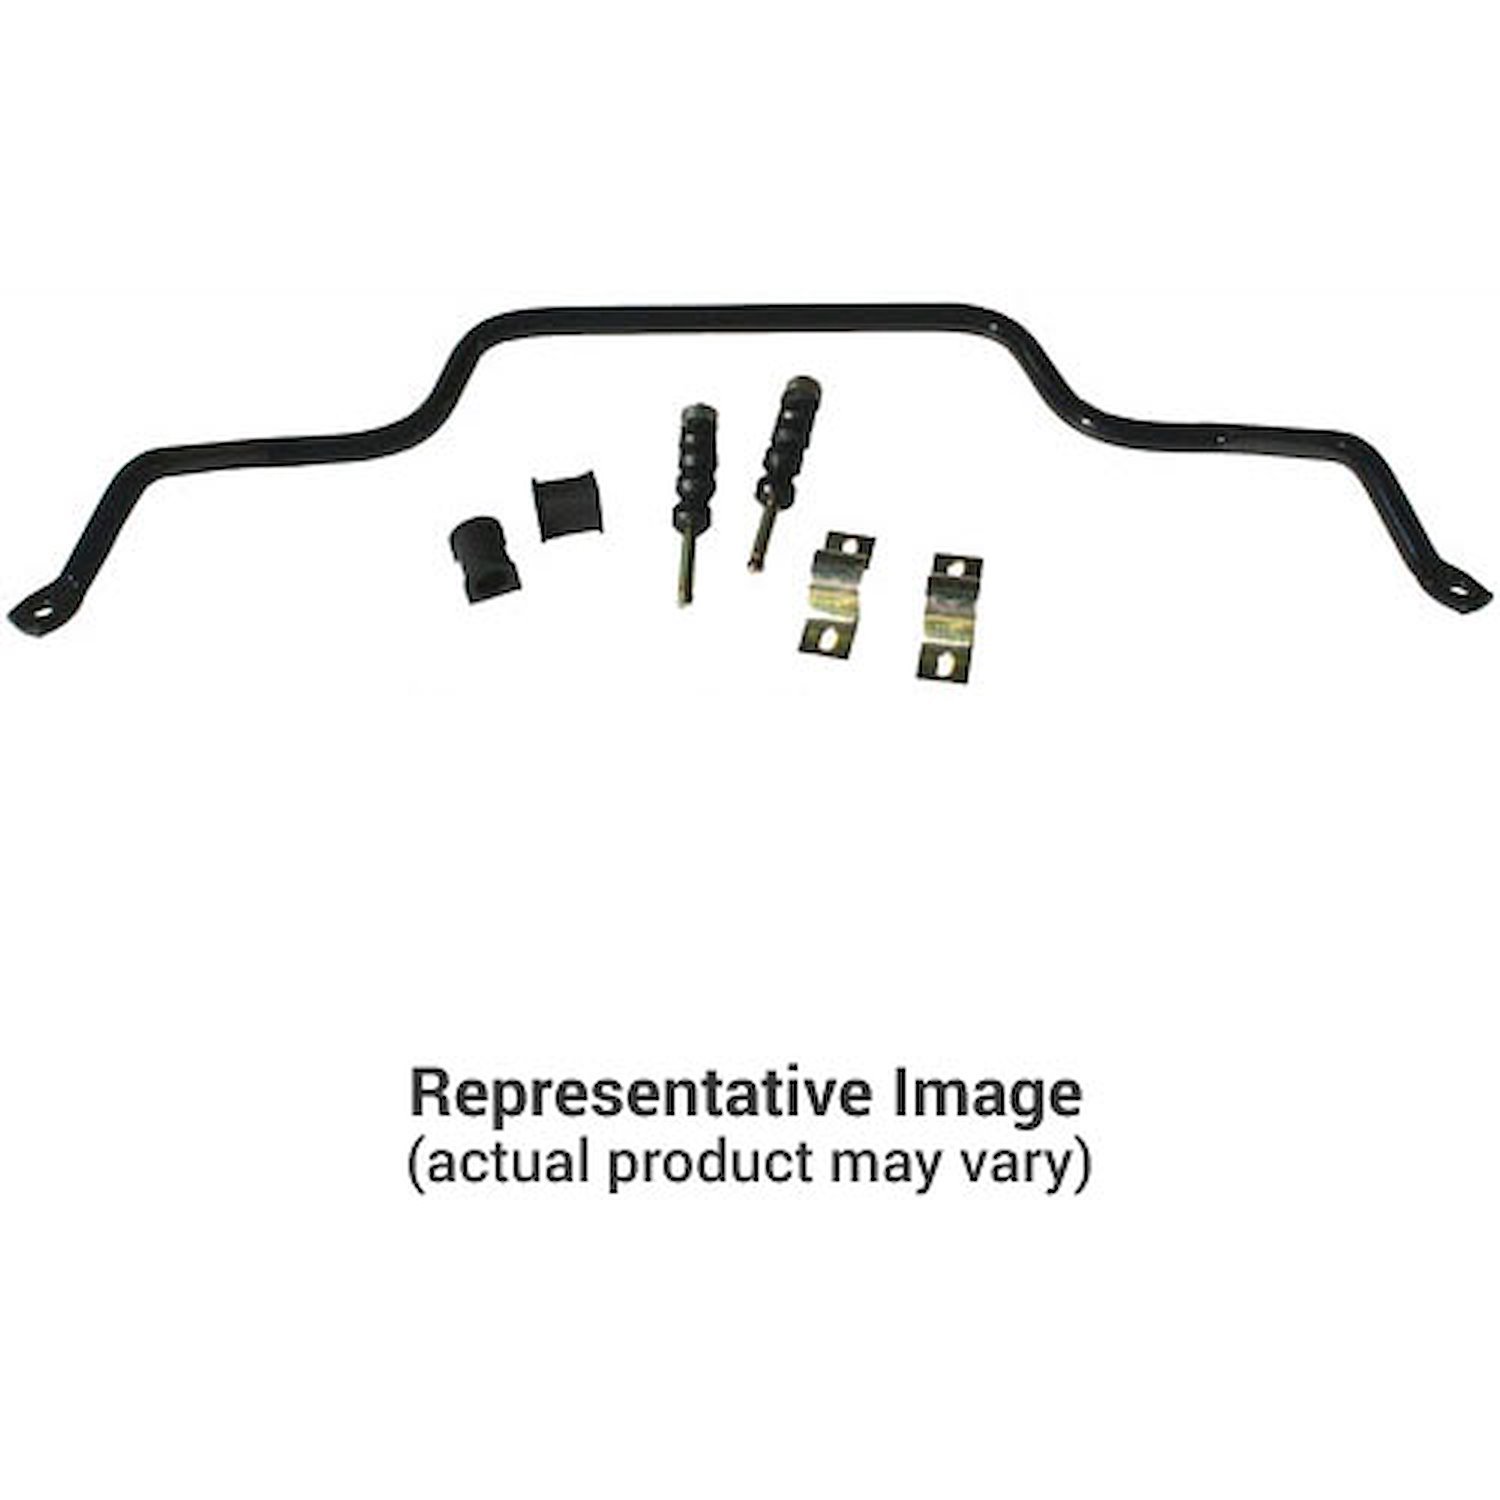 7/8" Front Sway Bar 1963-65 Ford Falcon